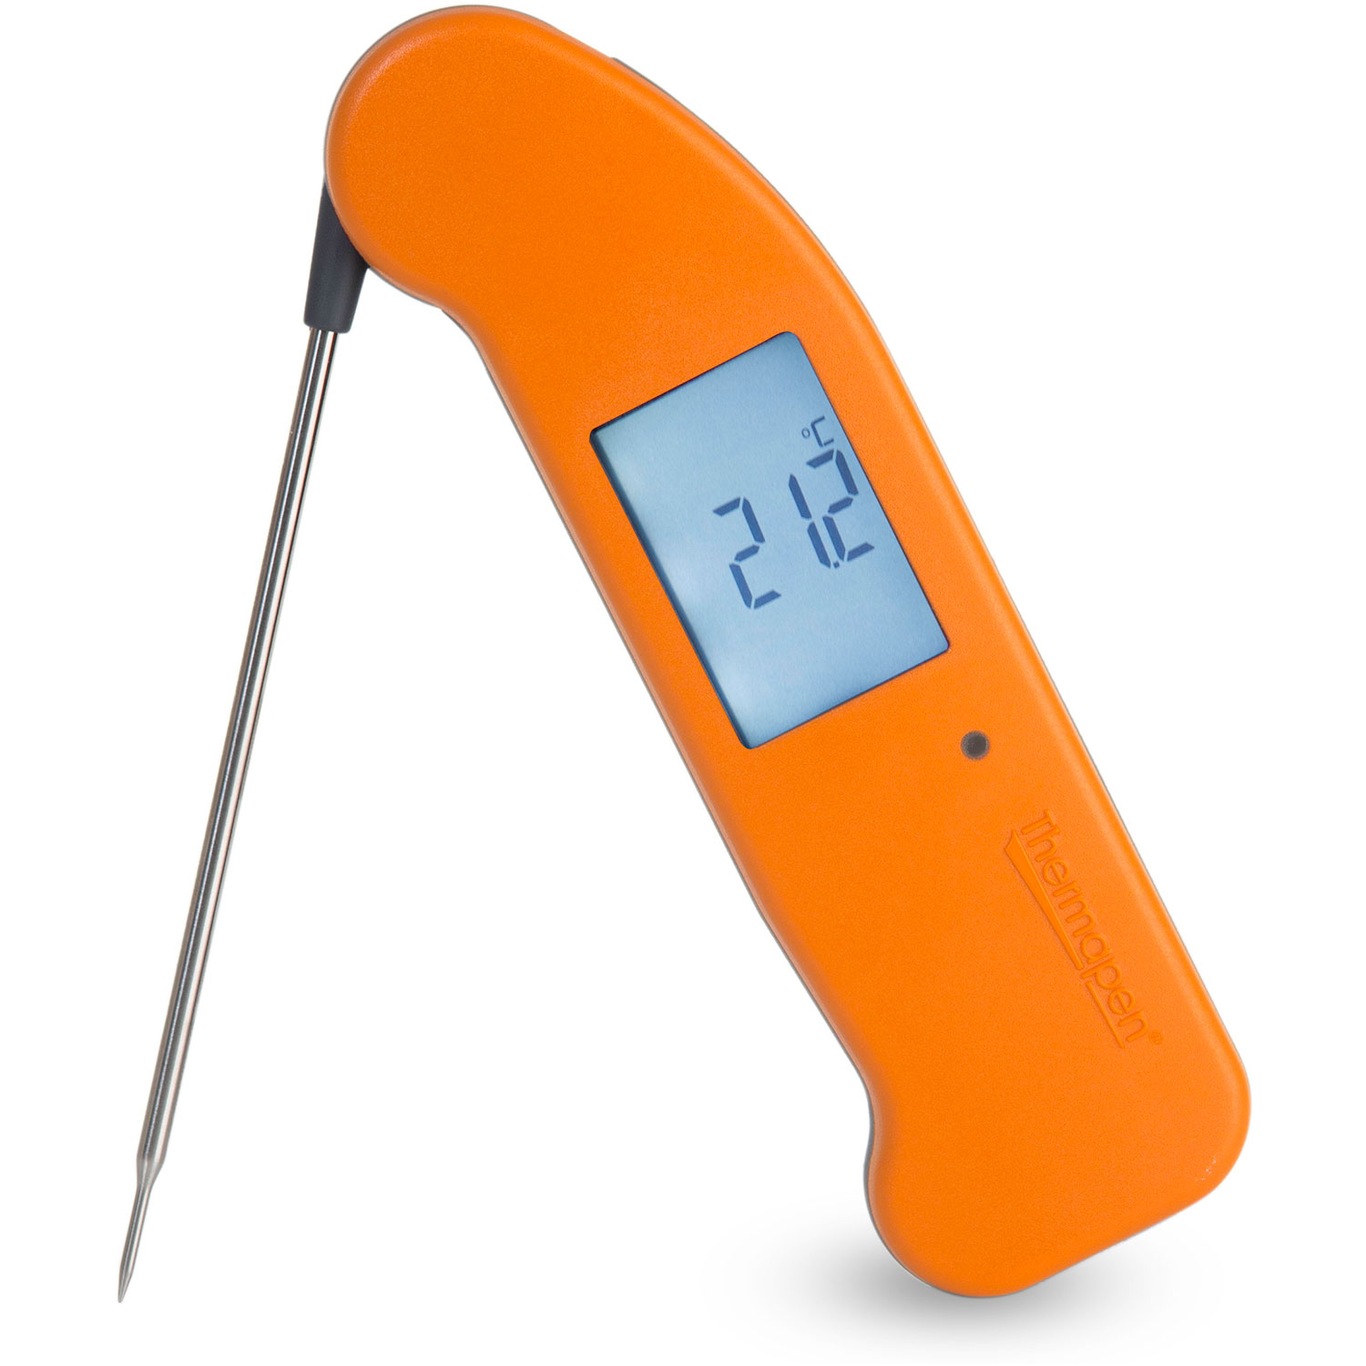 Thermapen One Thermometer, Orange